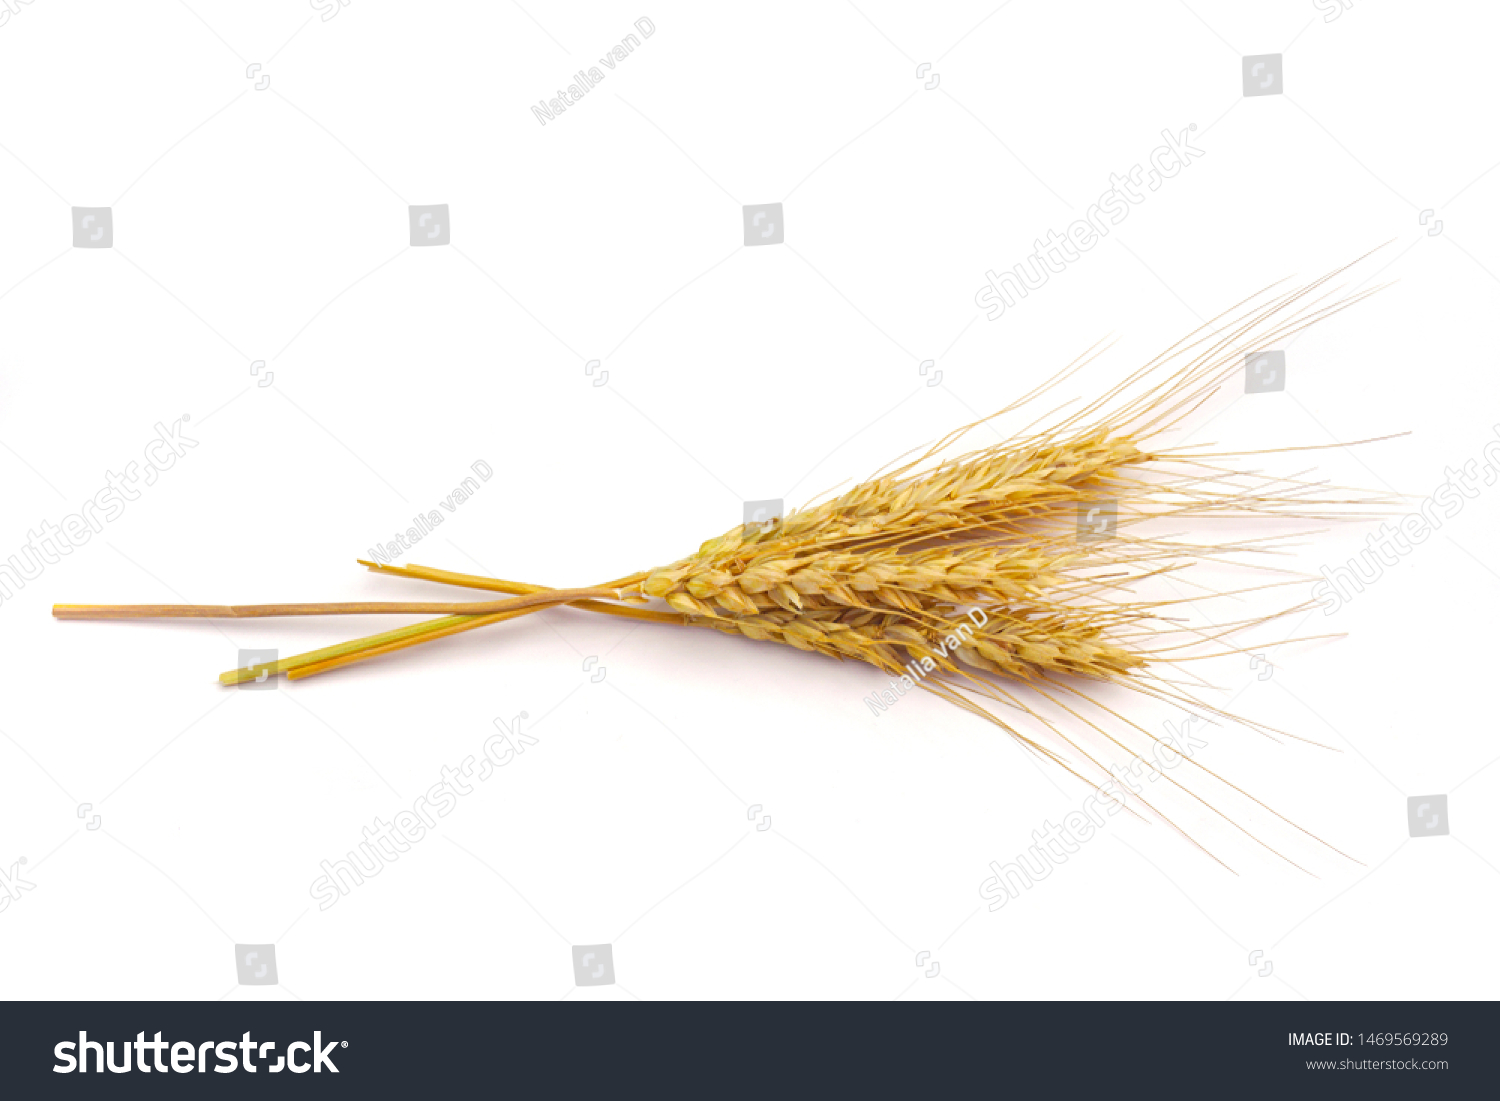 a bright closeup of a field of golden ripe dinkel hulled wheat Spelt Spelt (Triticum spelta dicoccum) rye grain relict crop health food ready for harvest isolated on white #1469569289